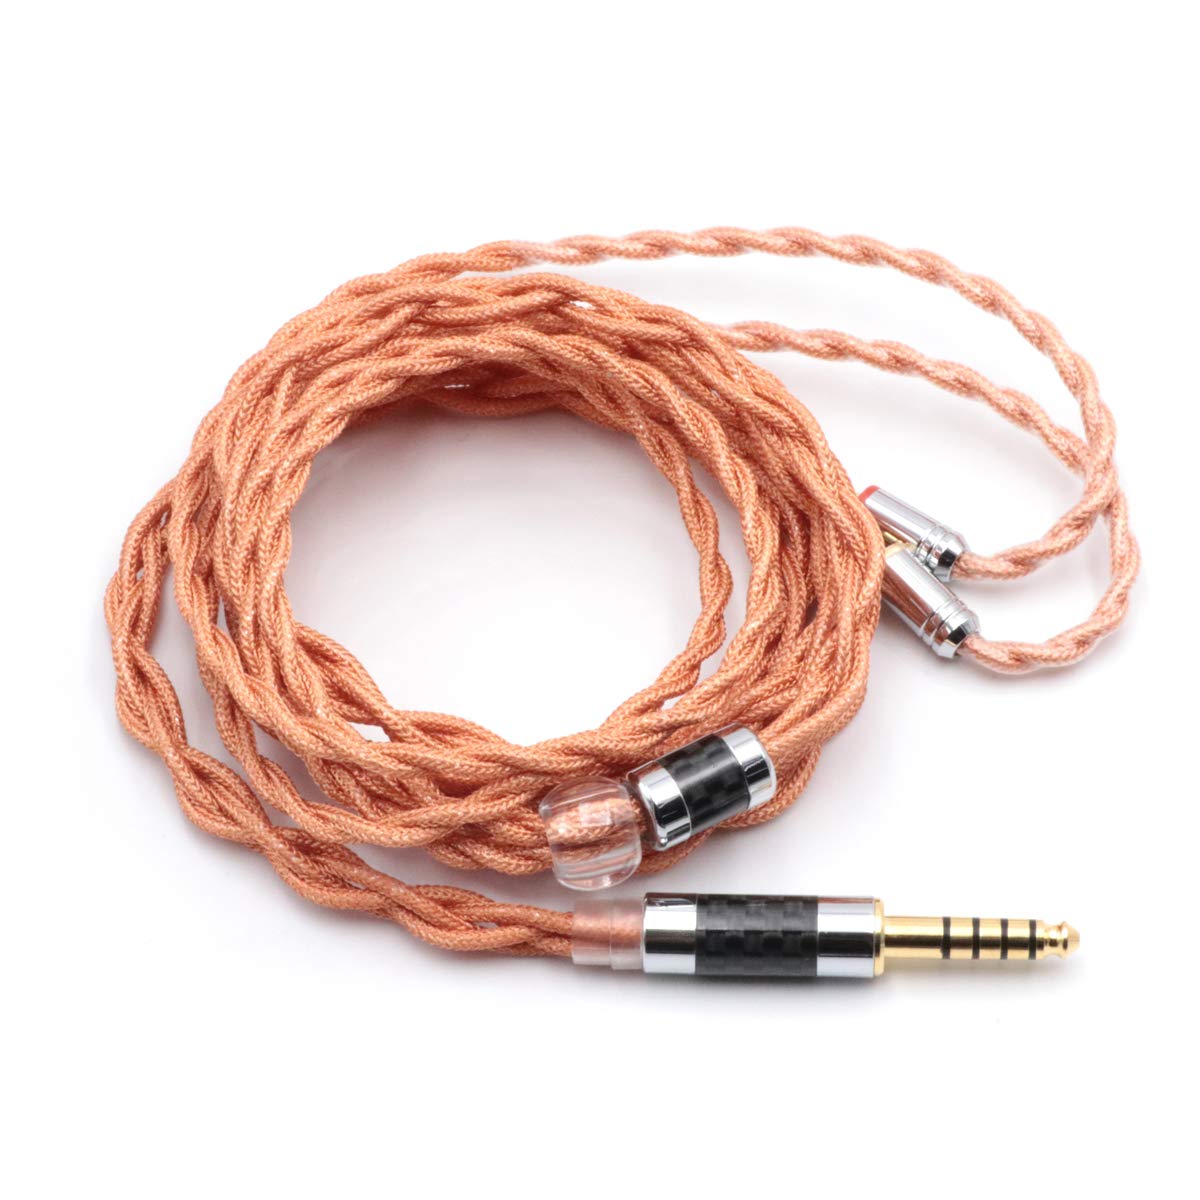 Linsoul LSC09 IEM HiFi Upgrade 4 Core Single Crystal Copper Silver Plated Earphone Cable or hifiman DAPs (4.4mm, MMCX)